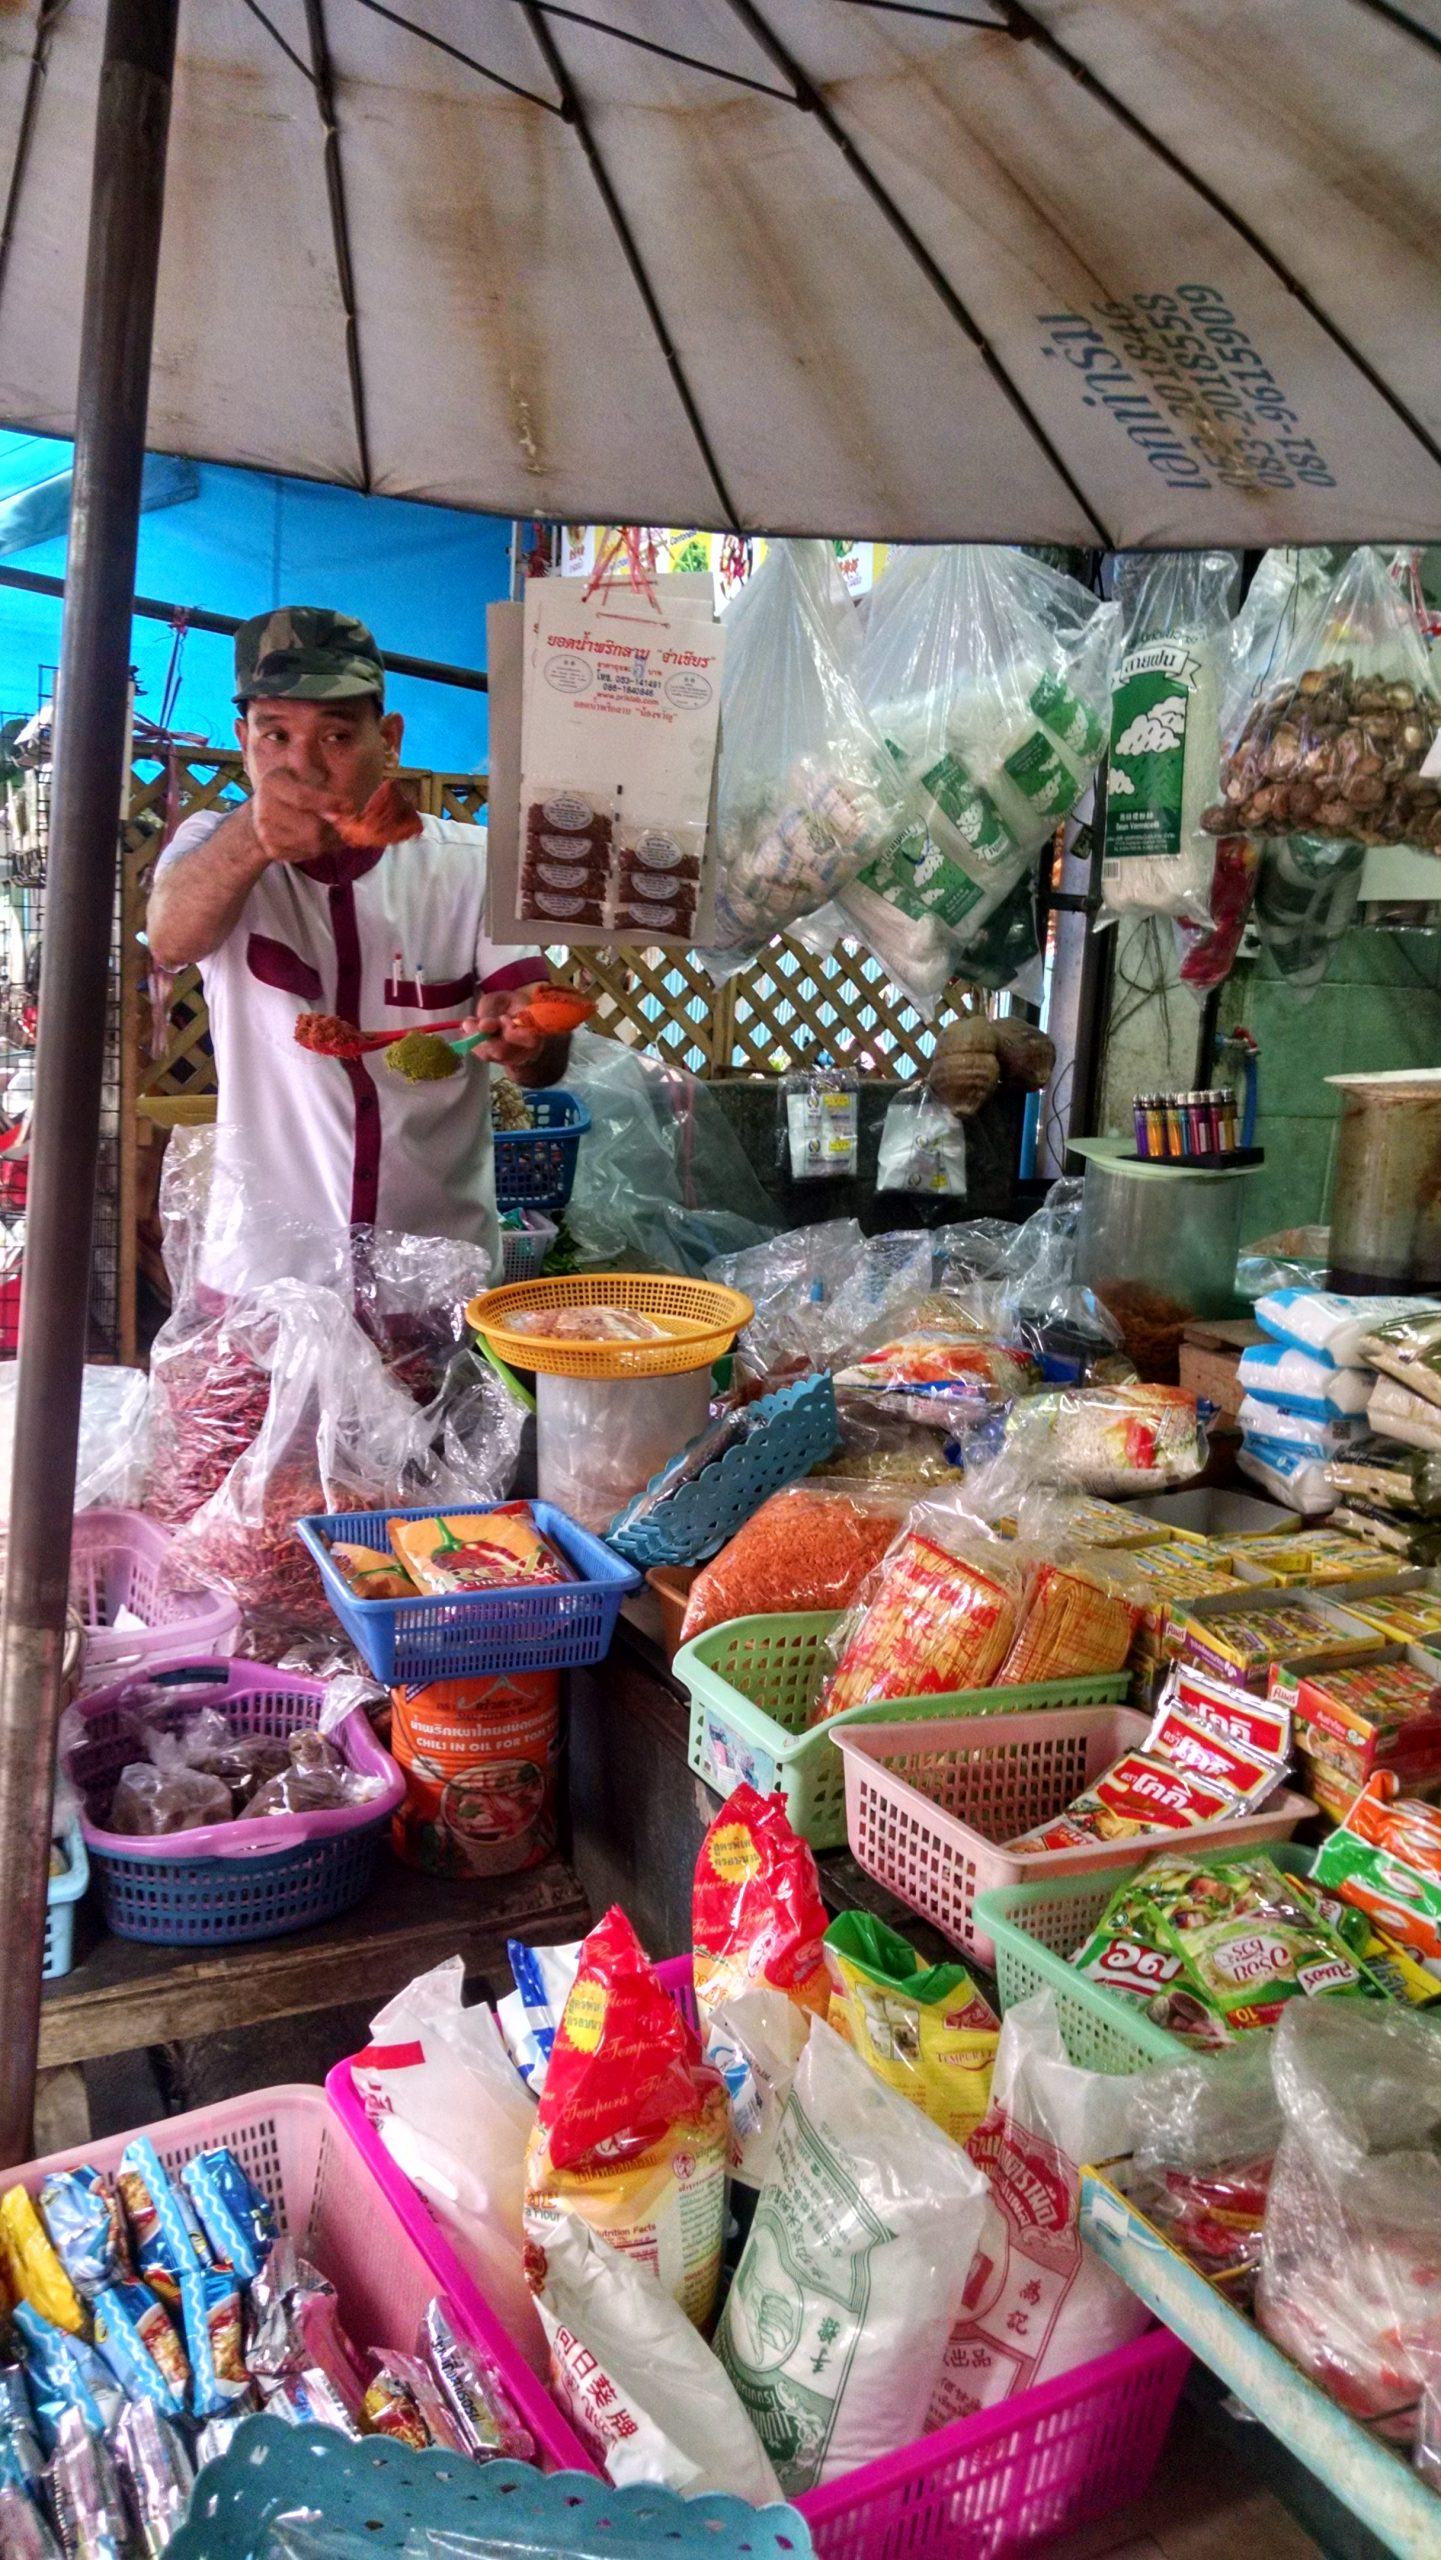 Shopping for ingredients in Chiang Mai